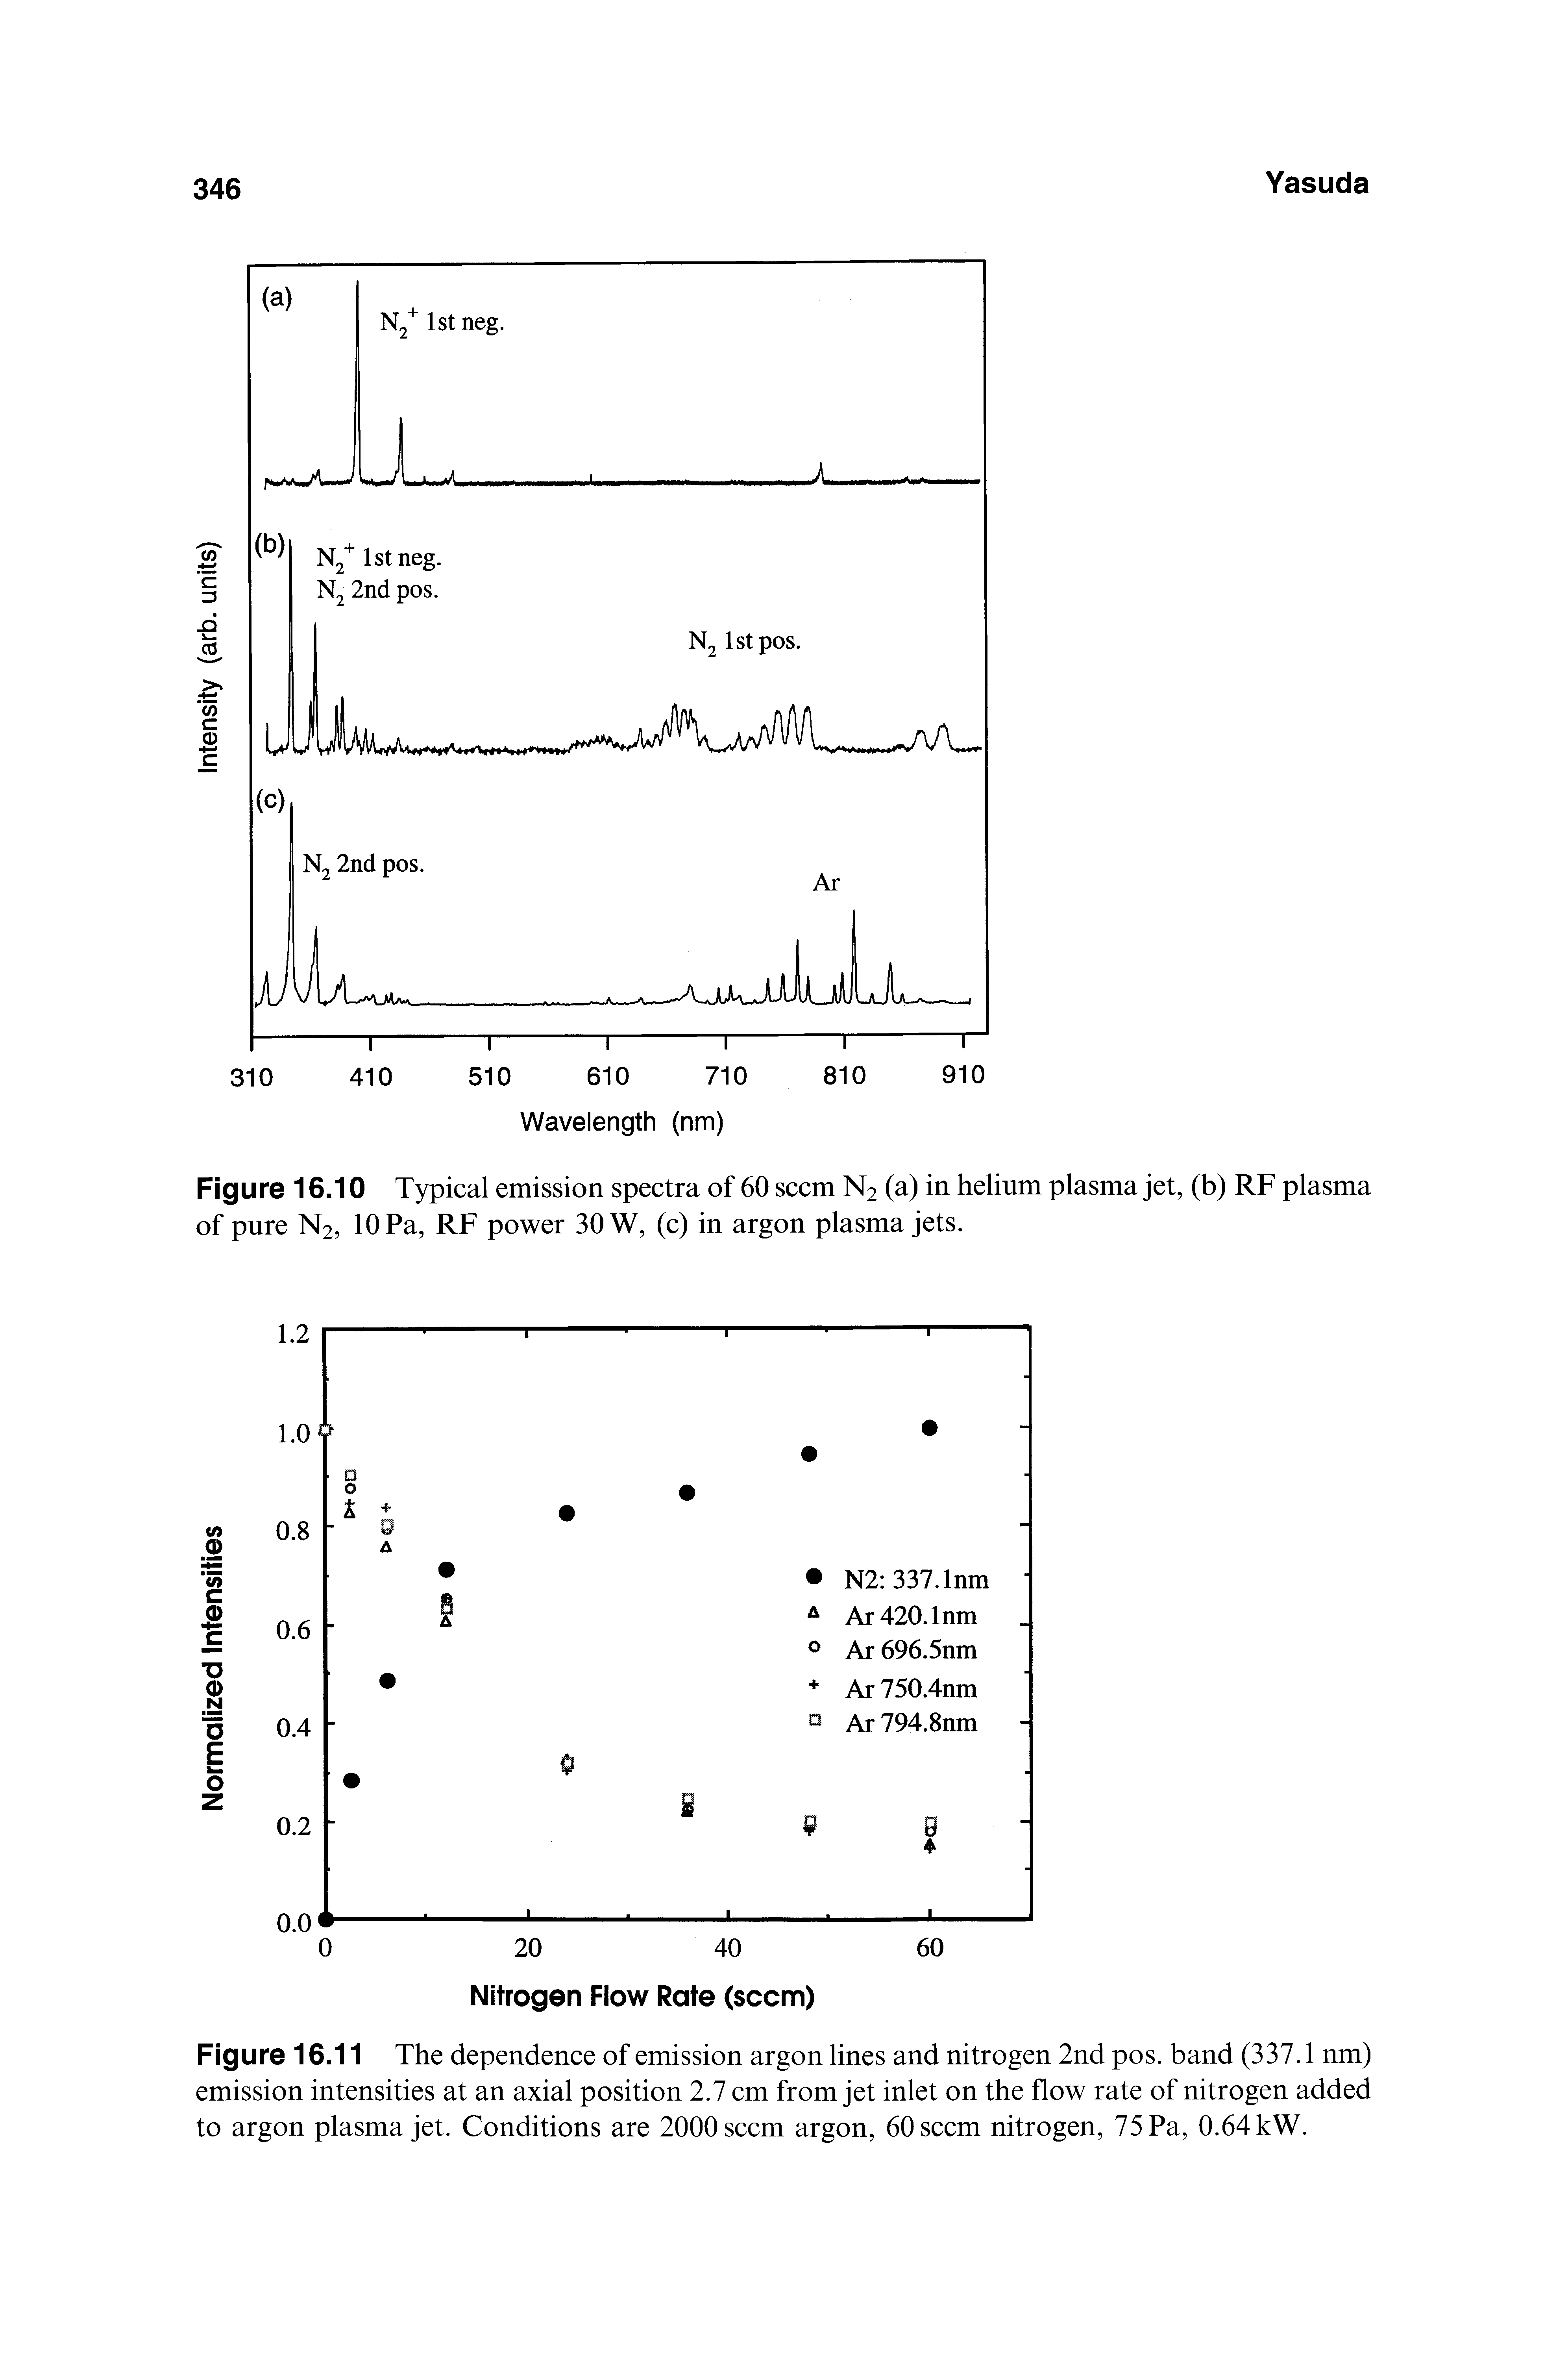 Figure 16.11 The dependence of emission argon lines and nitrogen 2nd pos. band (337.1 nm) emission intensities at an axial position 2.7 cm from jet inlet on the flow rate of nitrogen added to argon plasma jet. Conditions are 2000 seem argon, 60 seem nitrogen, 75 Pa, 0.64 kW.